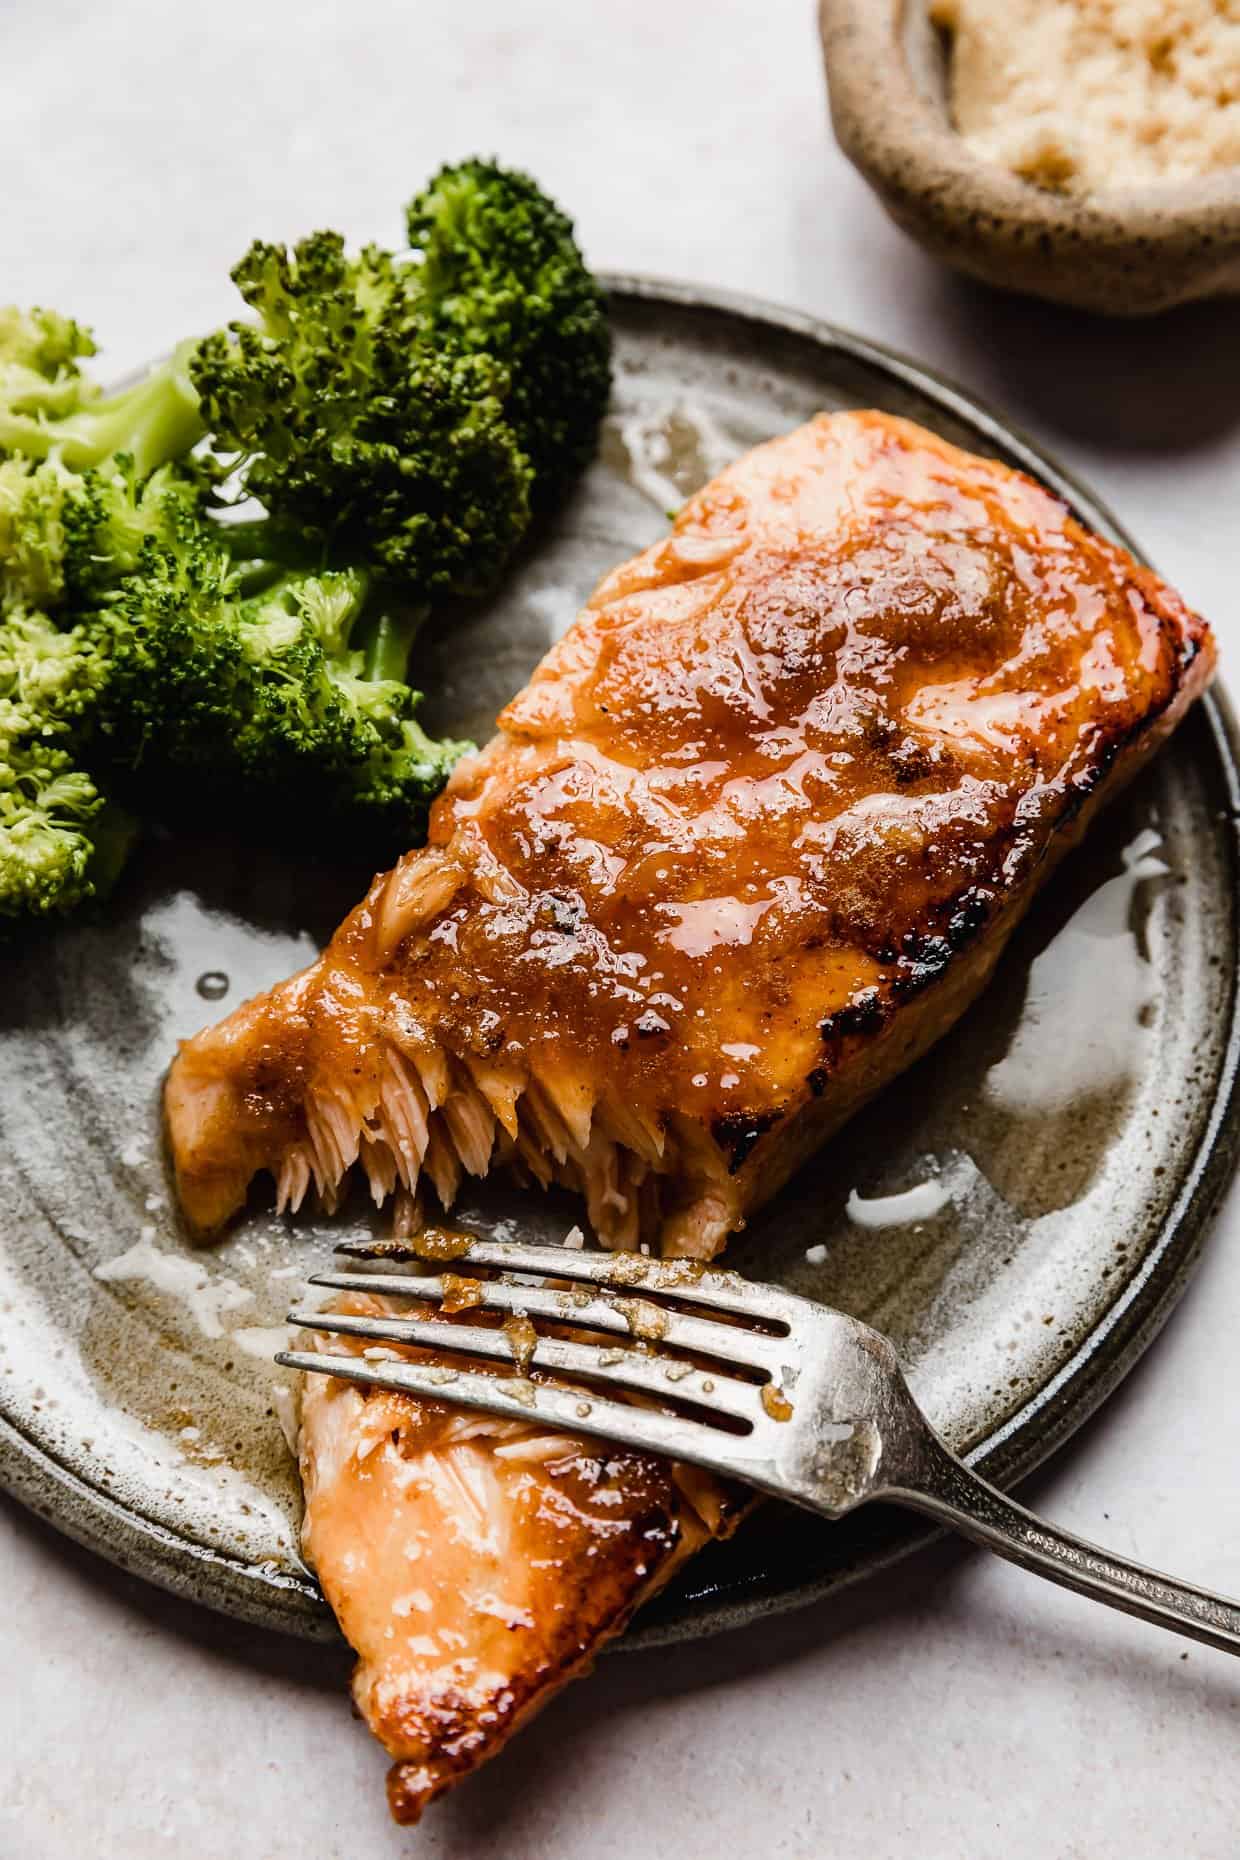 Brown Sugar glazed Salmon on a grey plate on a white background.